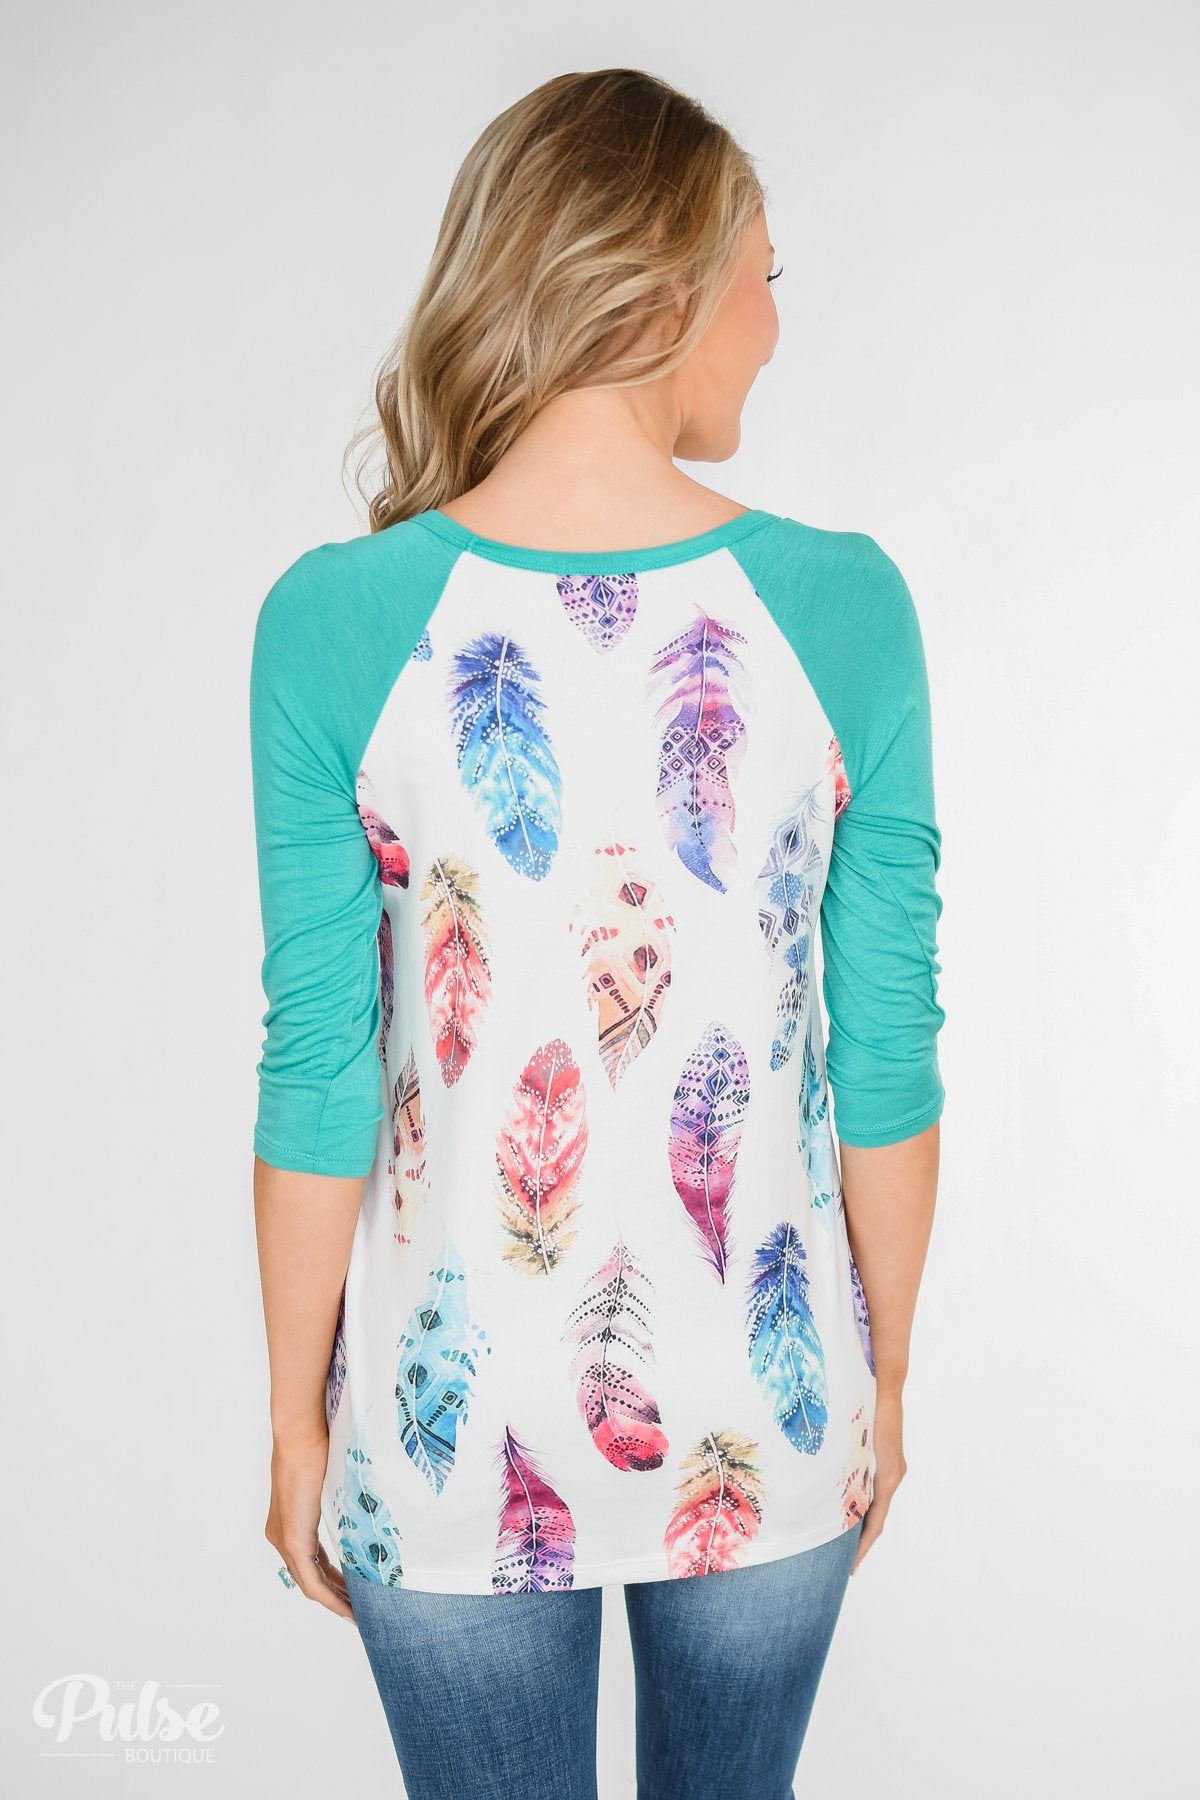 Aztec Feather 3/4 Sleeve Top- Teal